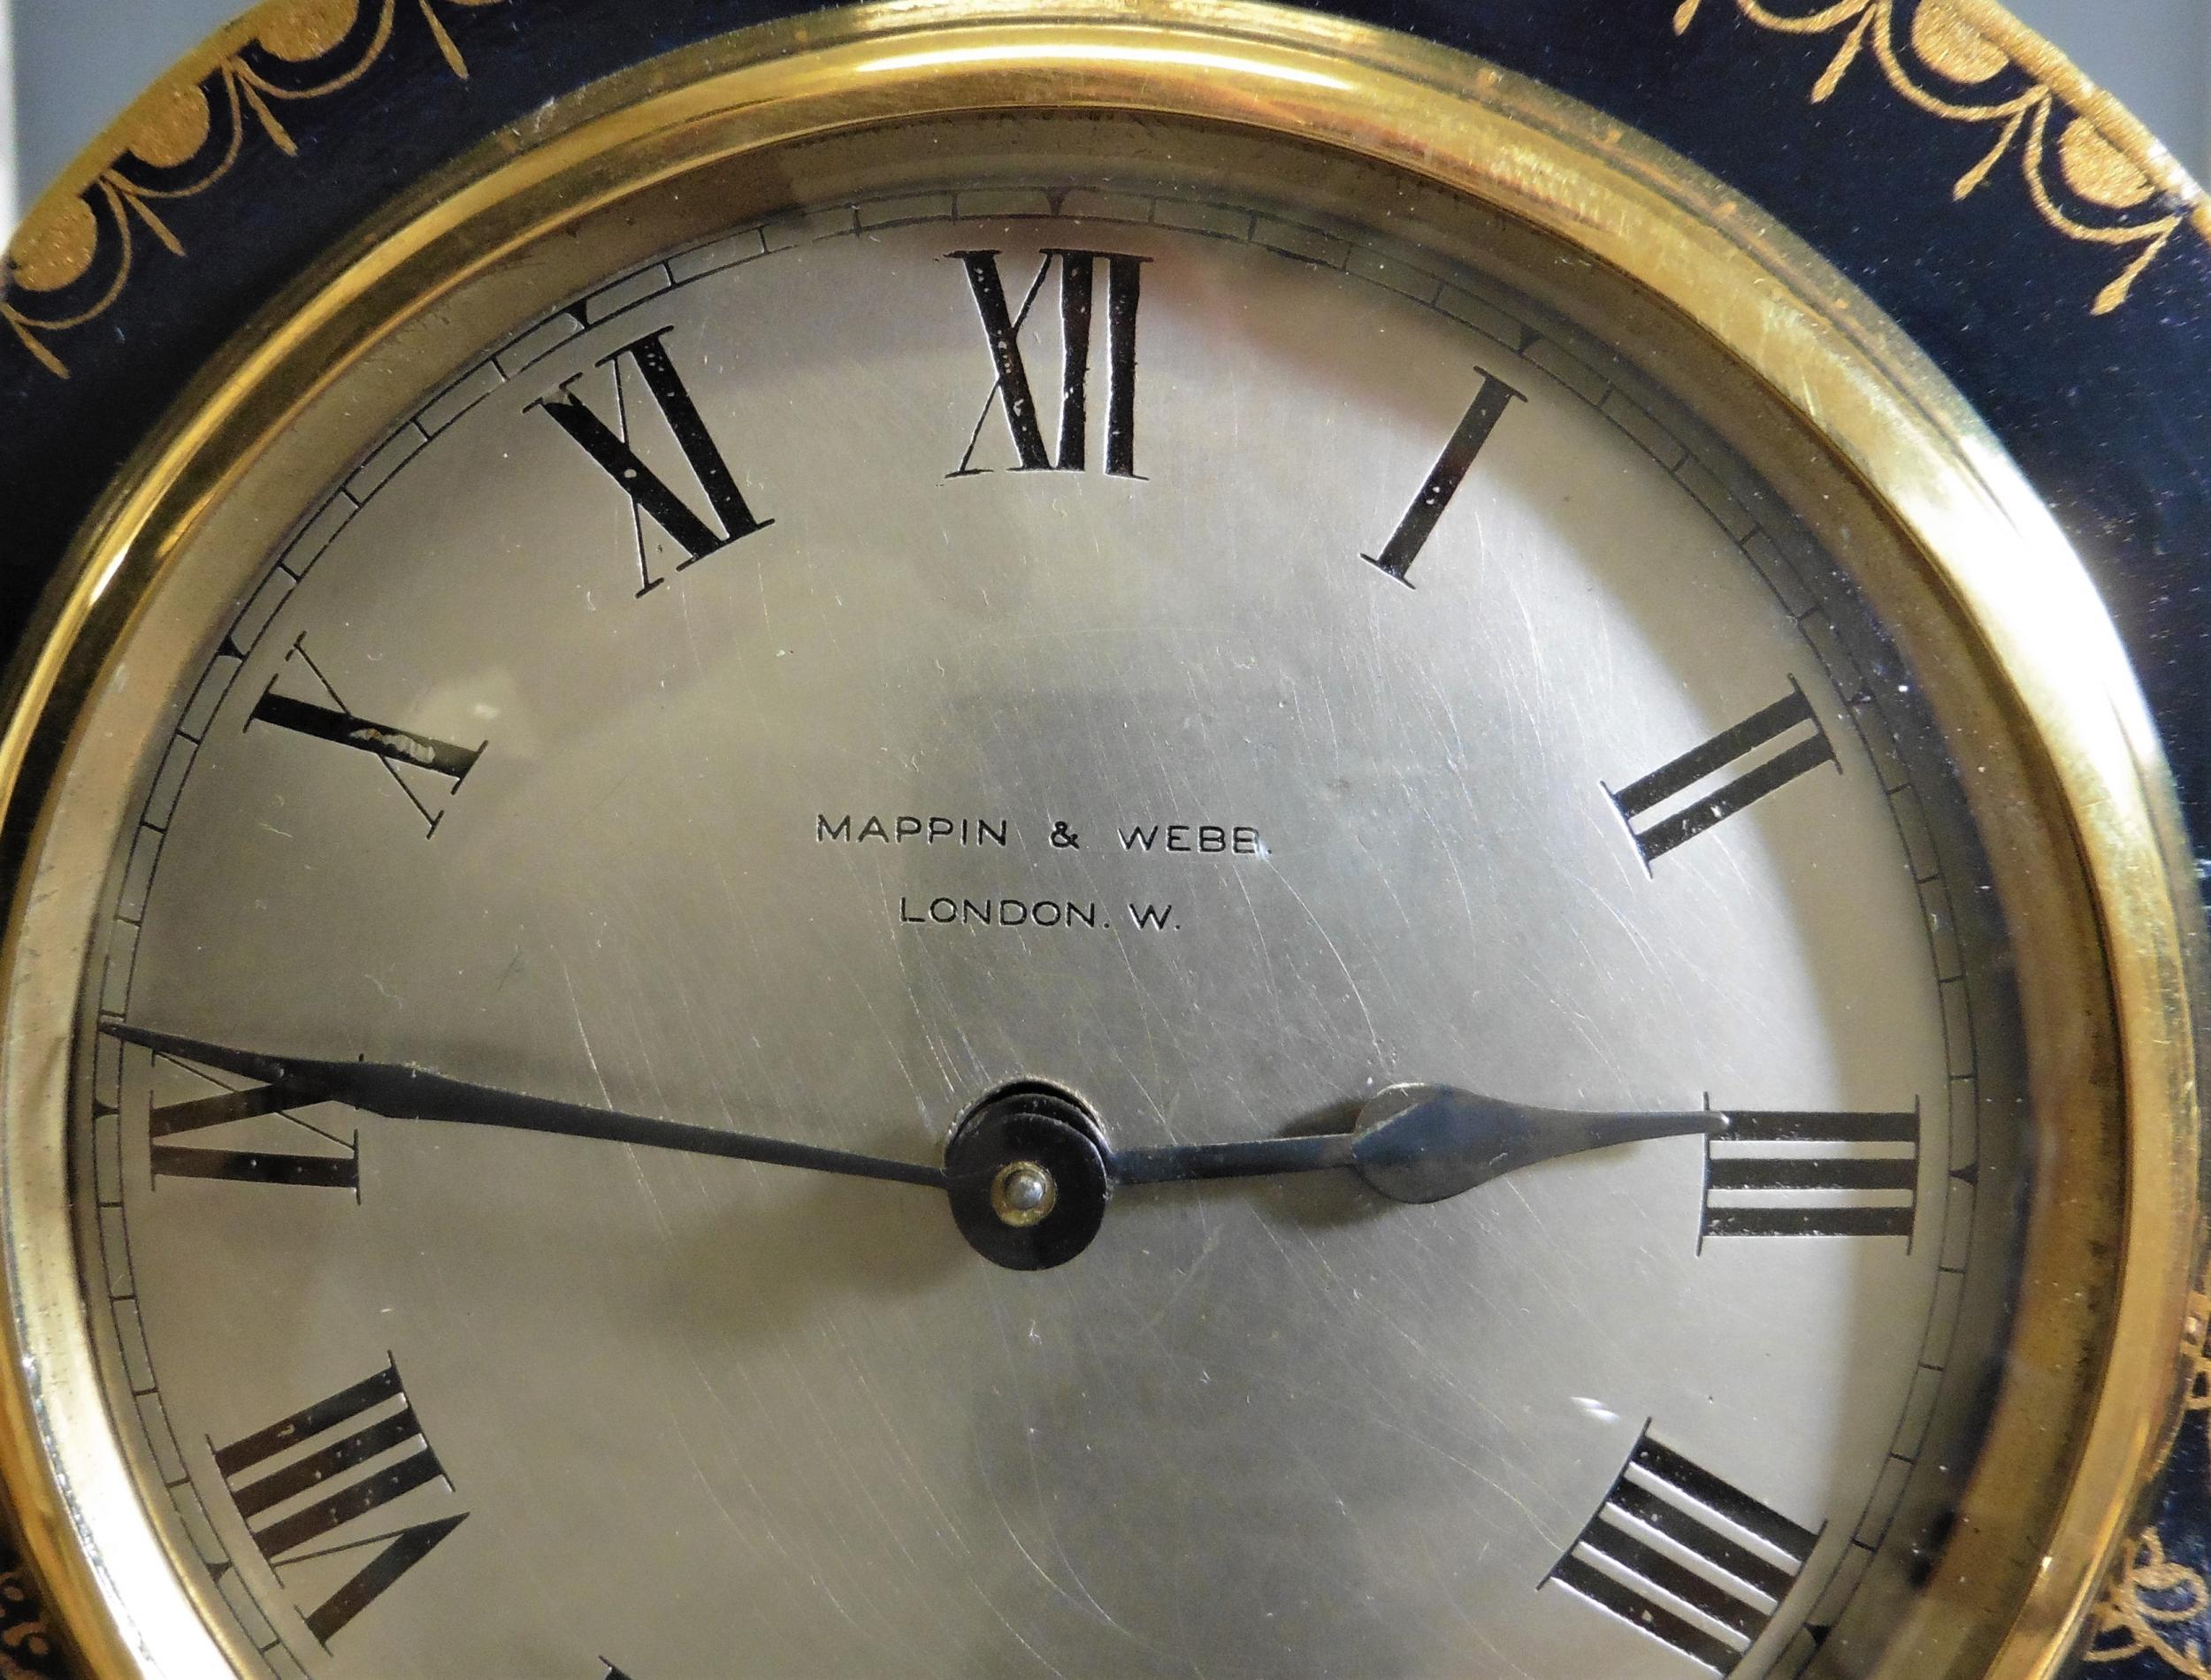 Edwardian mantel clock in a serpentine top case with beautiful raised chinoiserie decoration on a dark blue ground standing on gilded pad feet.

Silvered dial with Roman numerals and original ‘blued’ steel hands signed ‘Mappin & Webb’.

Eight